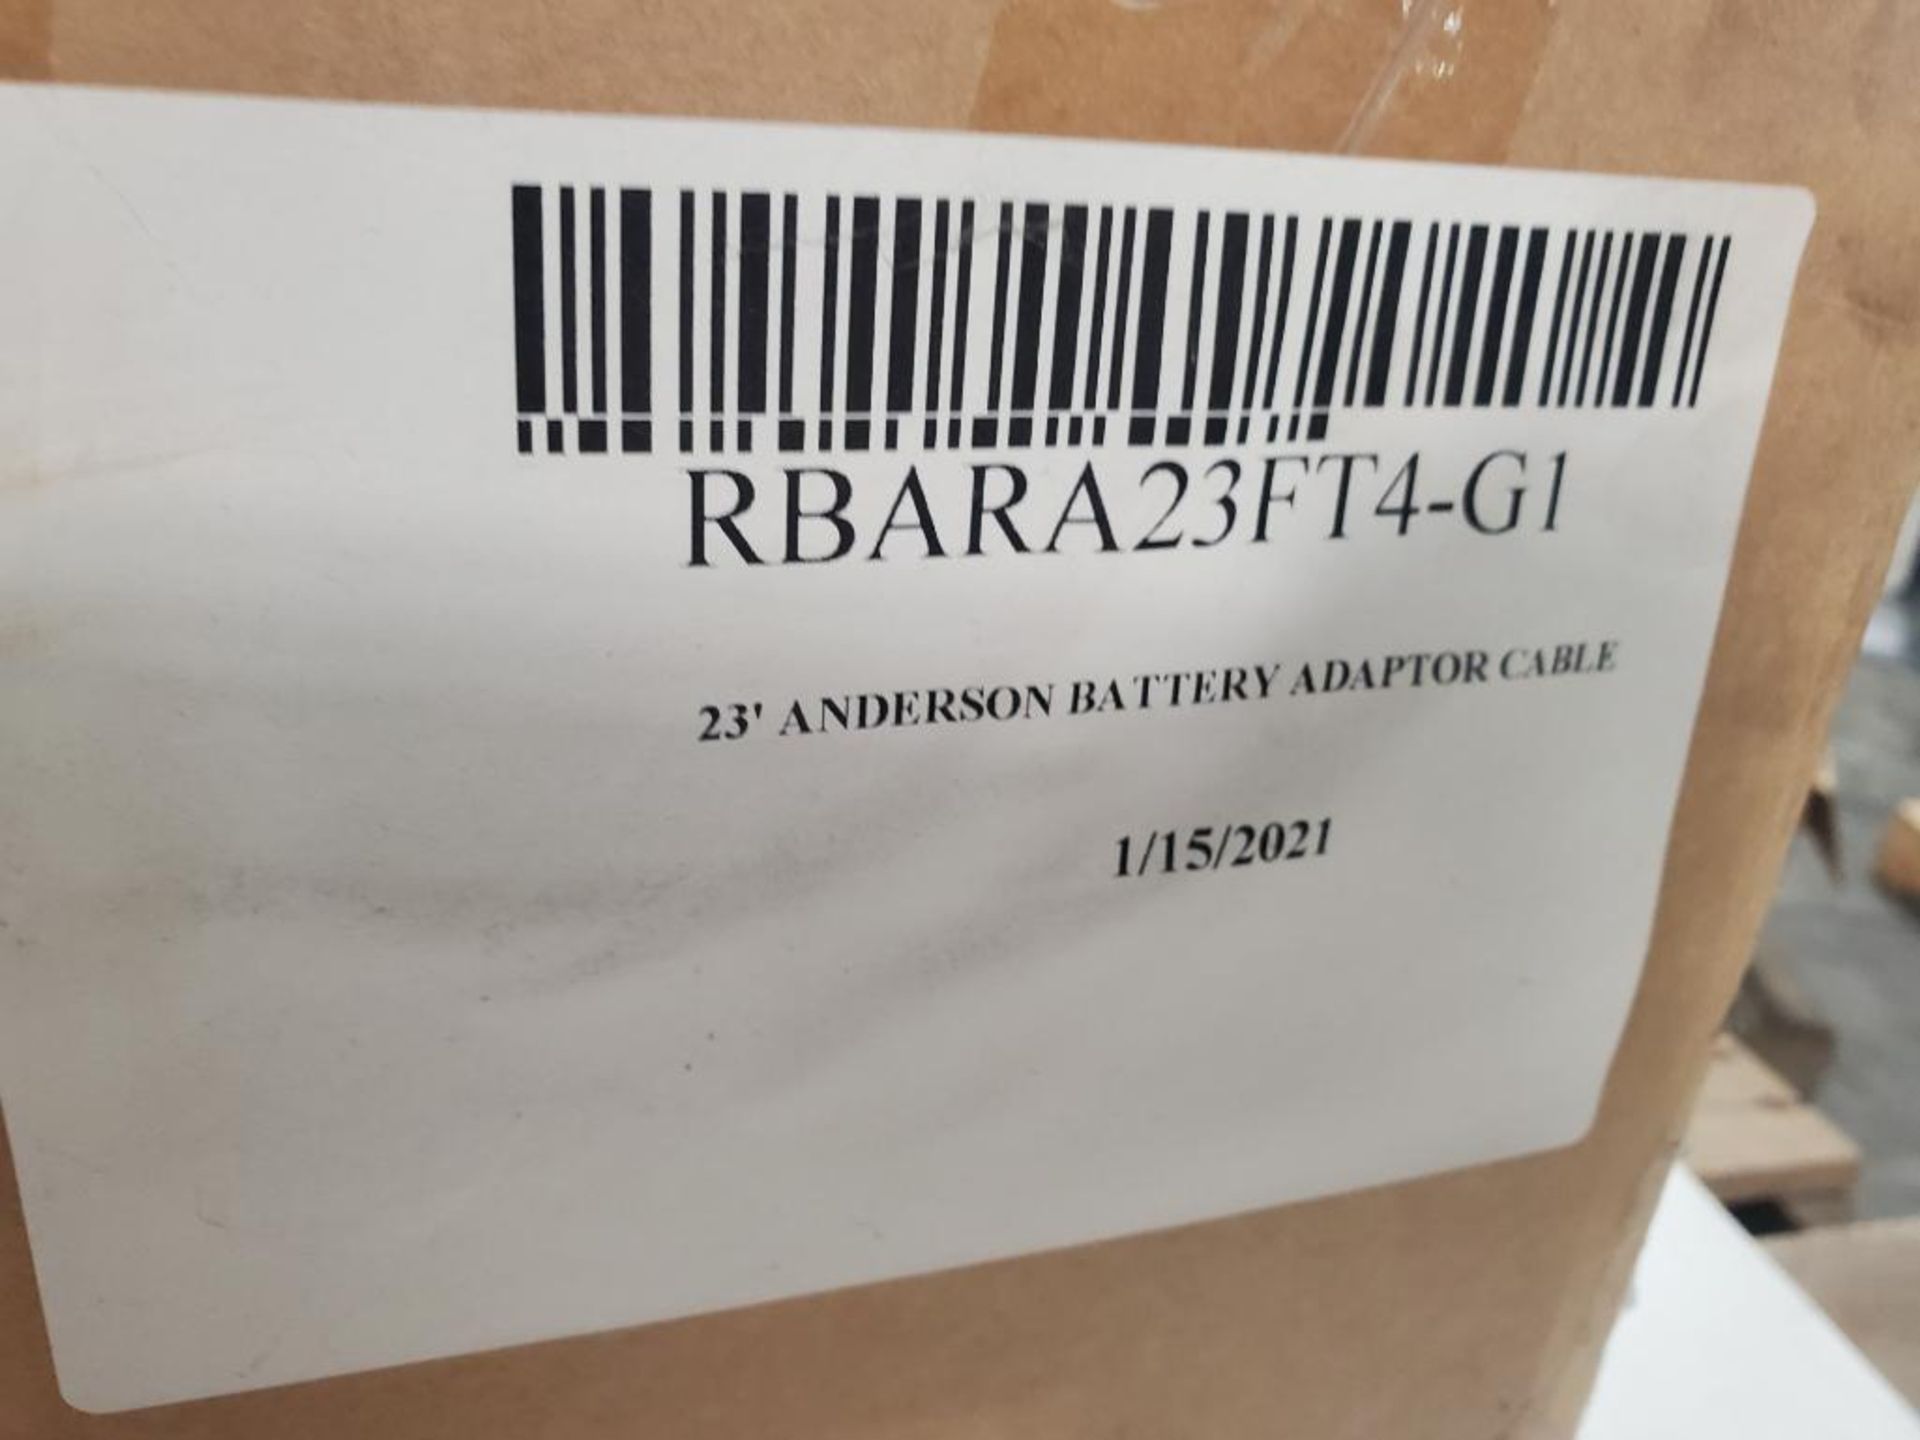 Qty 15 - Anderson 23ft battery adapter cable. RBARA23FT4-G1. 175A, 600V plug. New in box. - Image 4 of 8